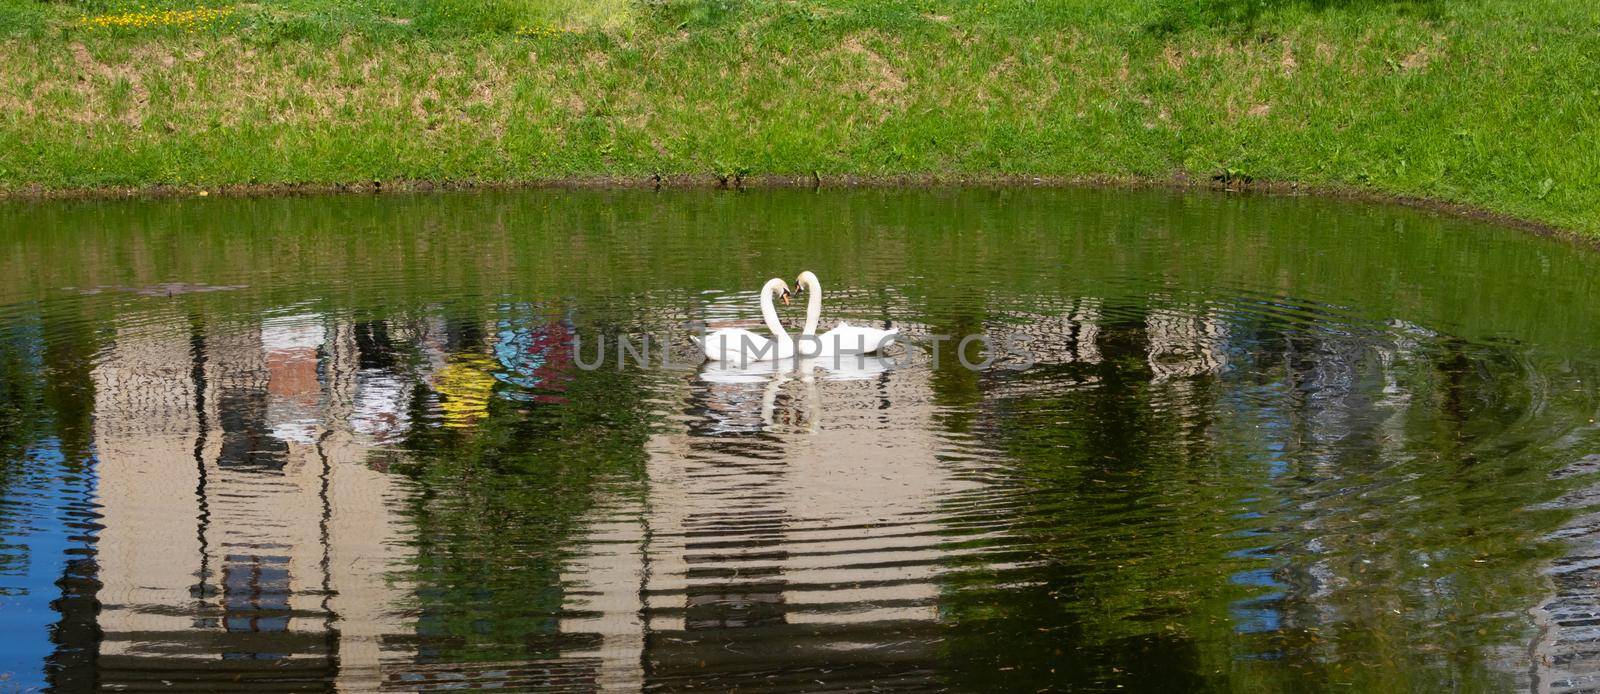 In the park on the city pond, floating swans arched their necks in the shape of hearts by lapushka62